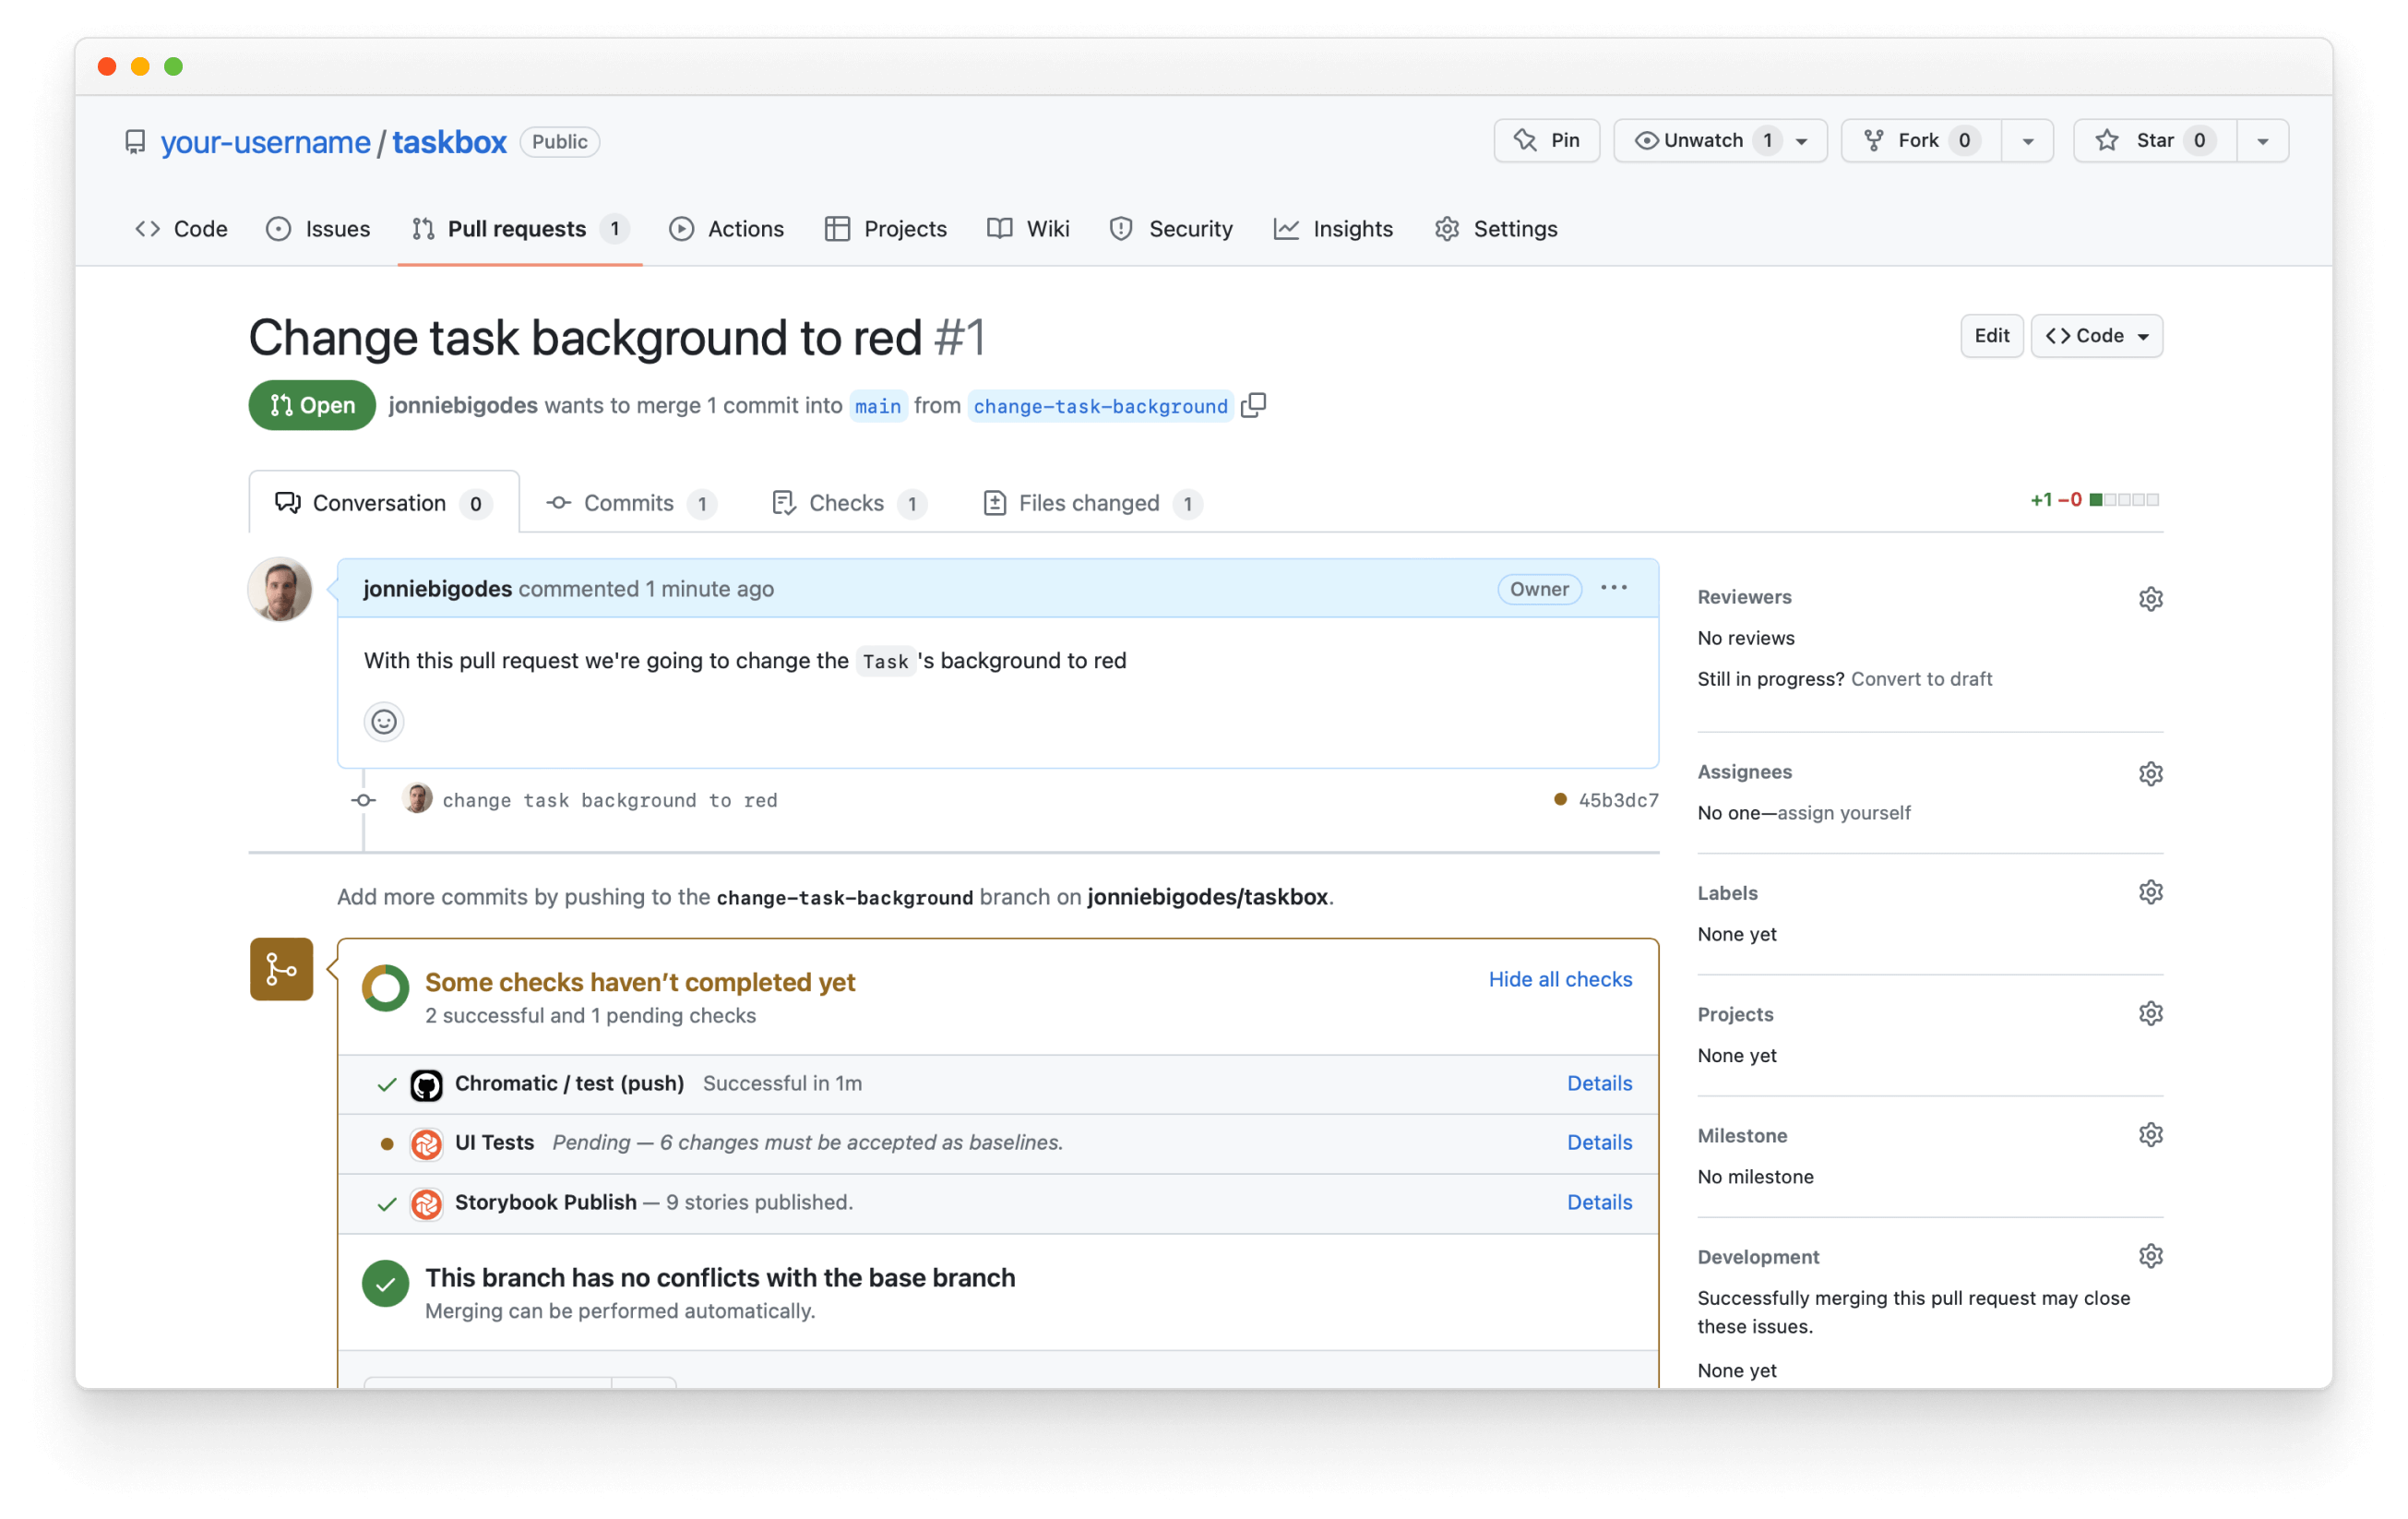 Created a PR in GitHub for task